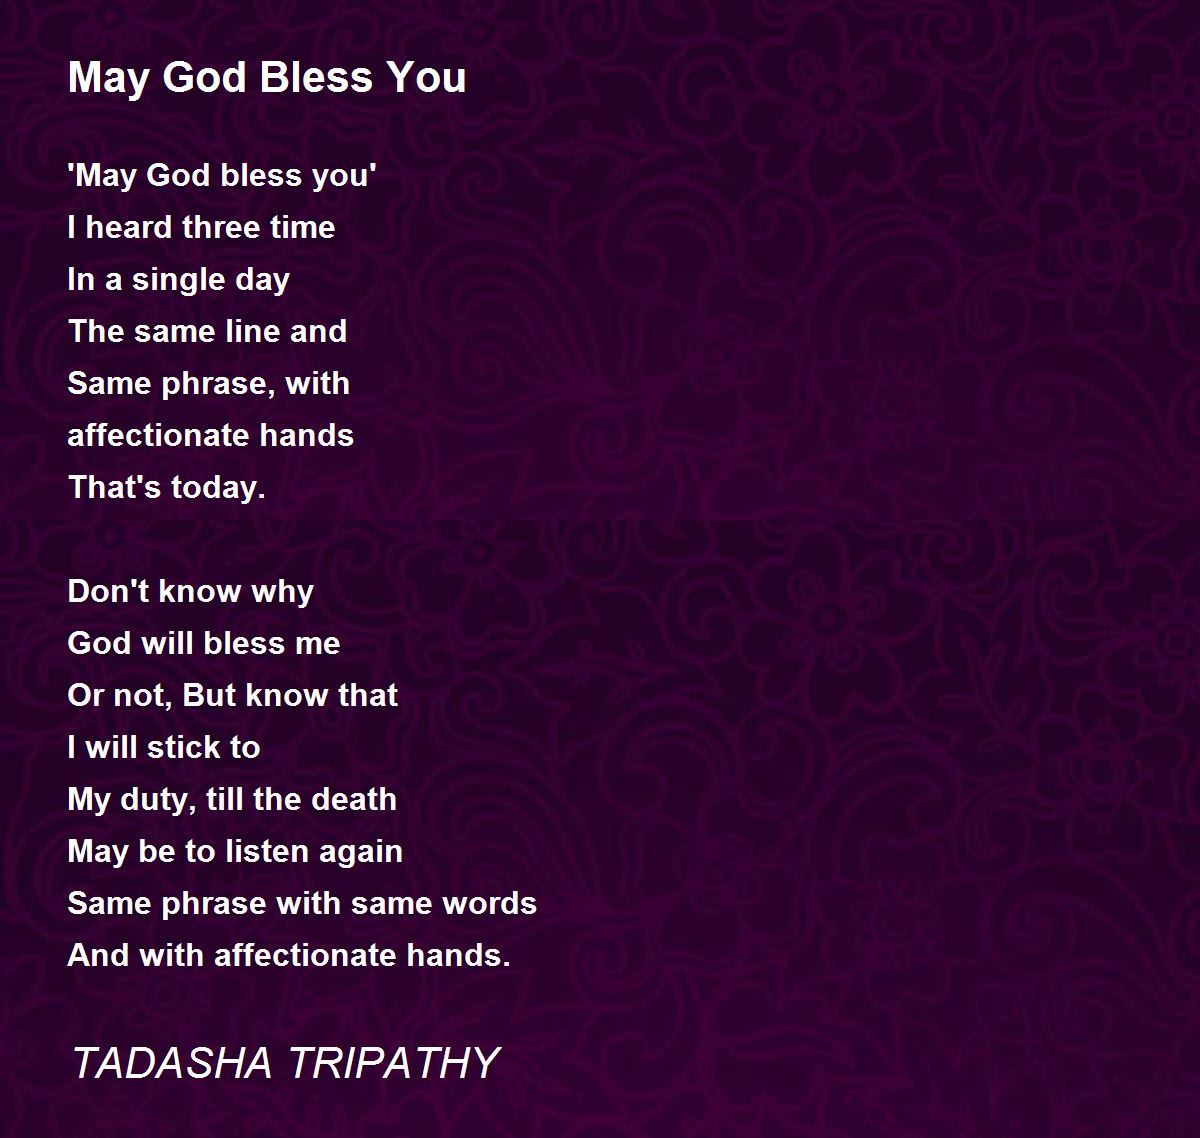 May God Bless You - May God Bless You Poem by TADASHA TRIPATHY